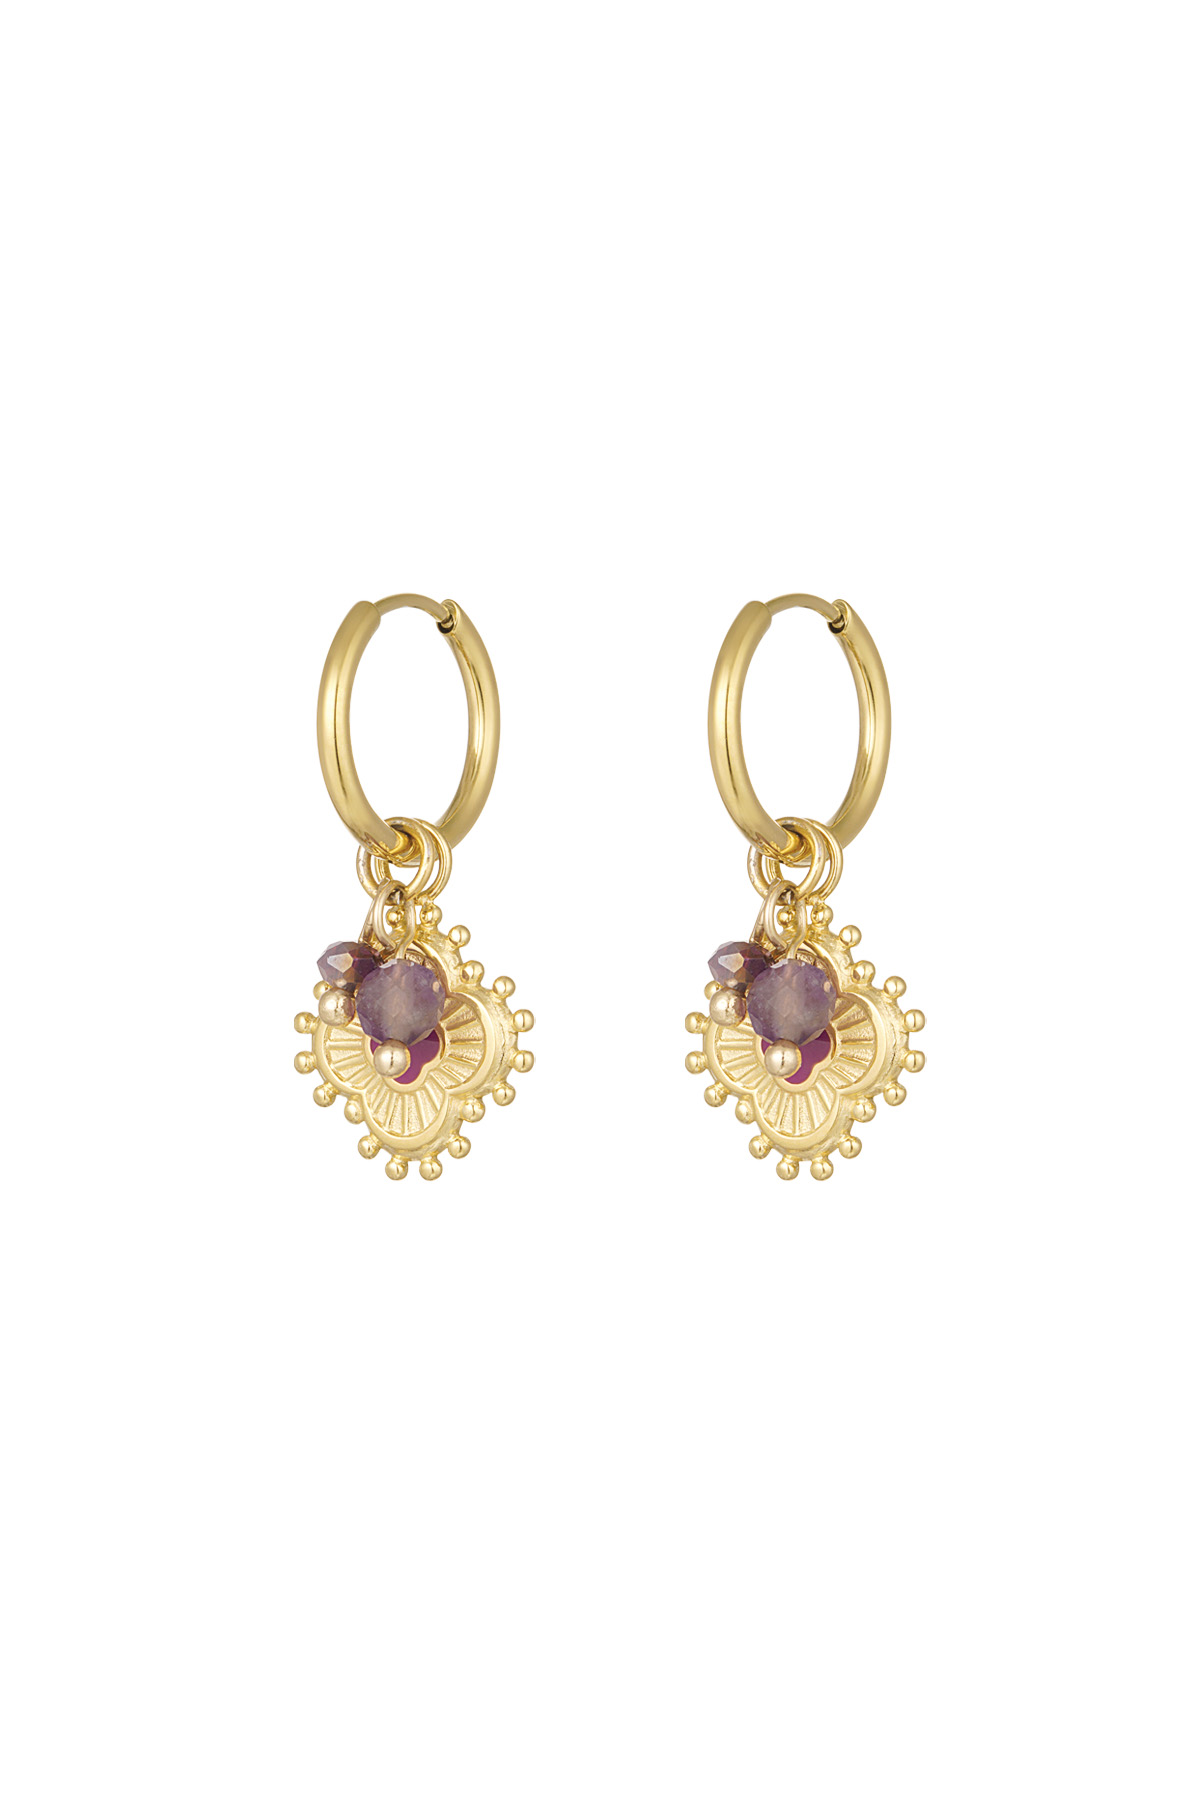 Clover earrings with beads - gold/purple h5 